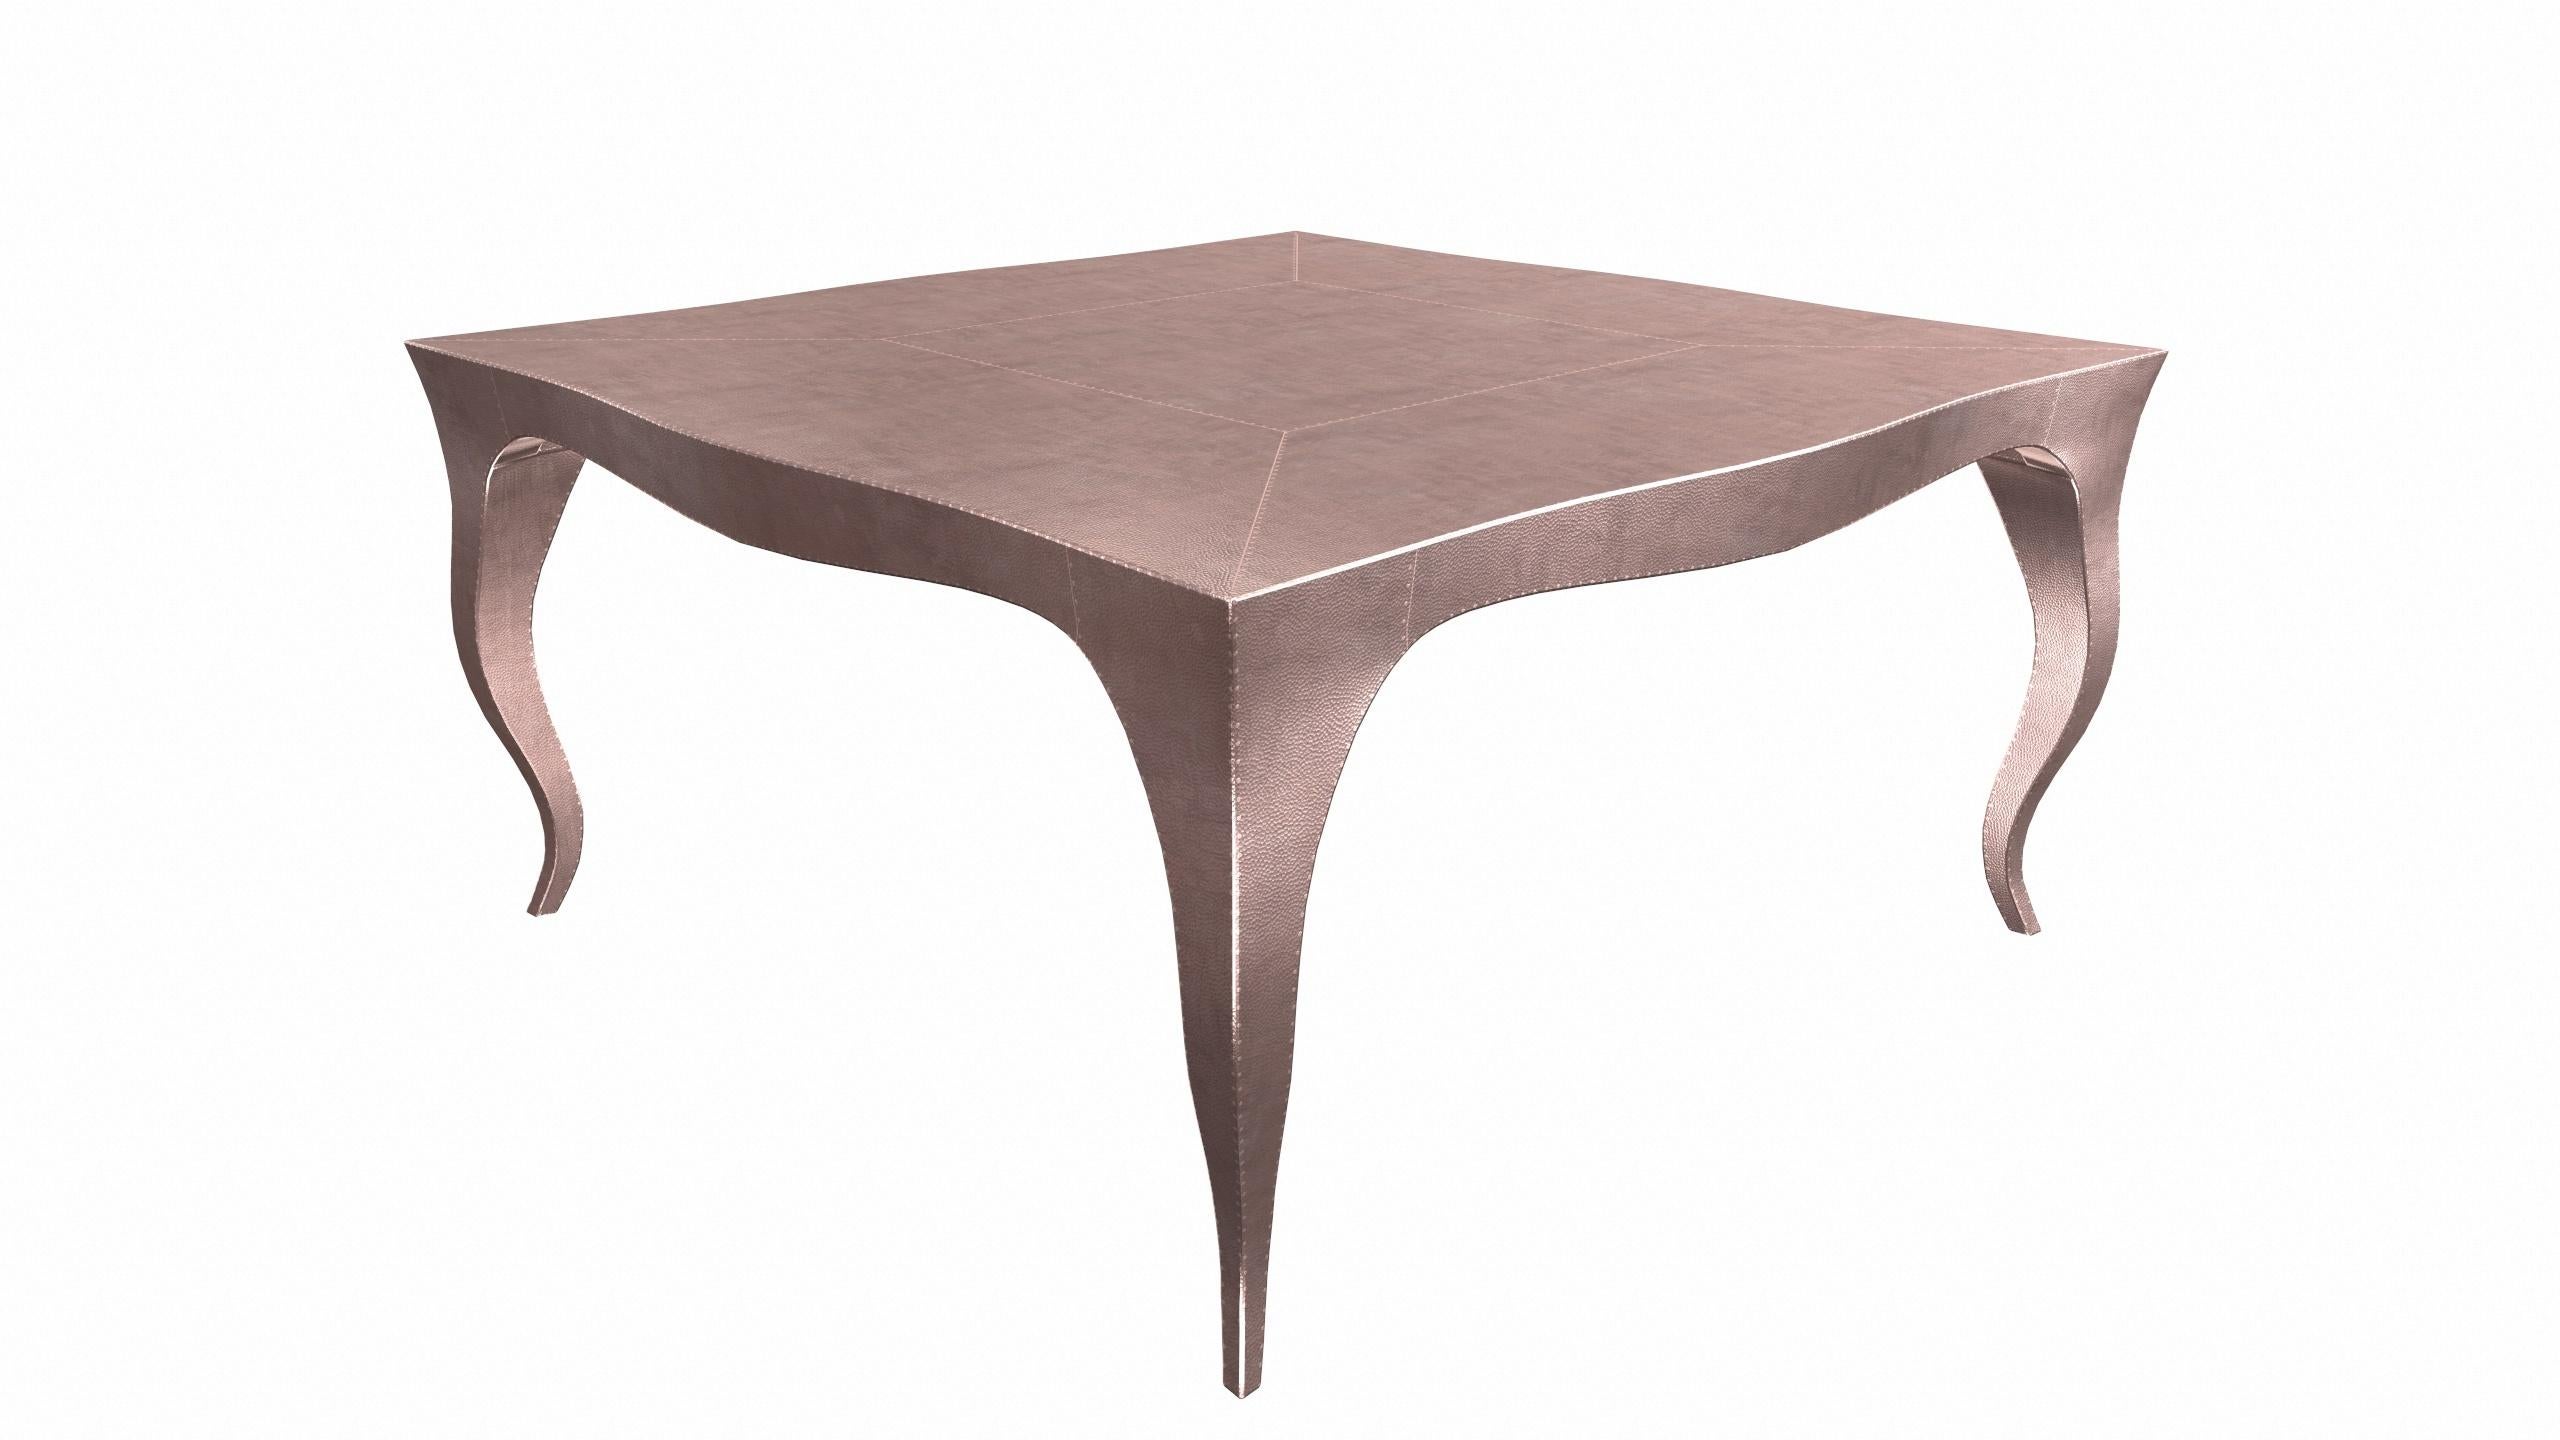 Other Louise Art Deco Nesting Tables Mid. Hammered Copper 18.5x18.5x10 inch by Paul M. For Sale